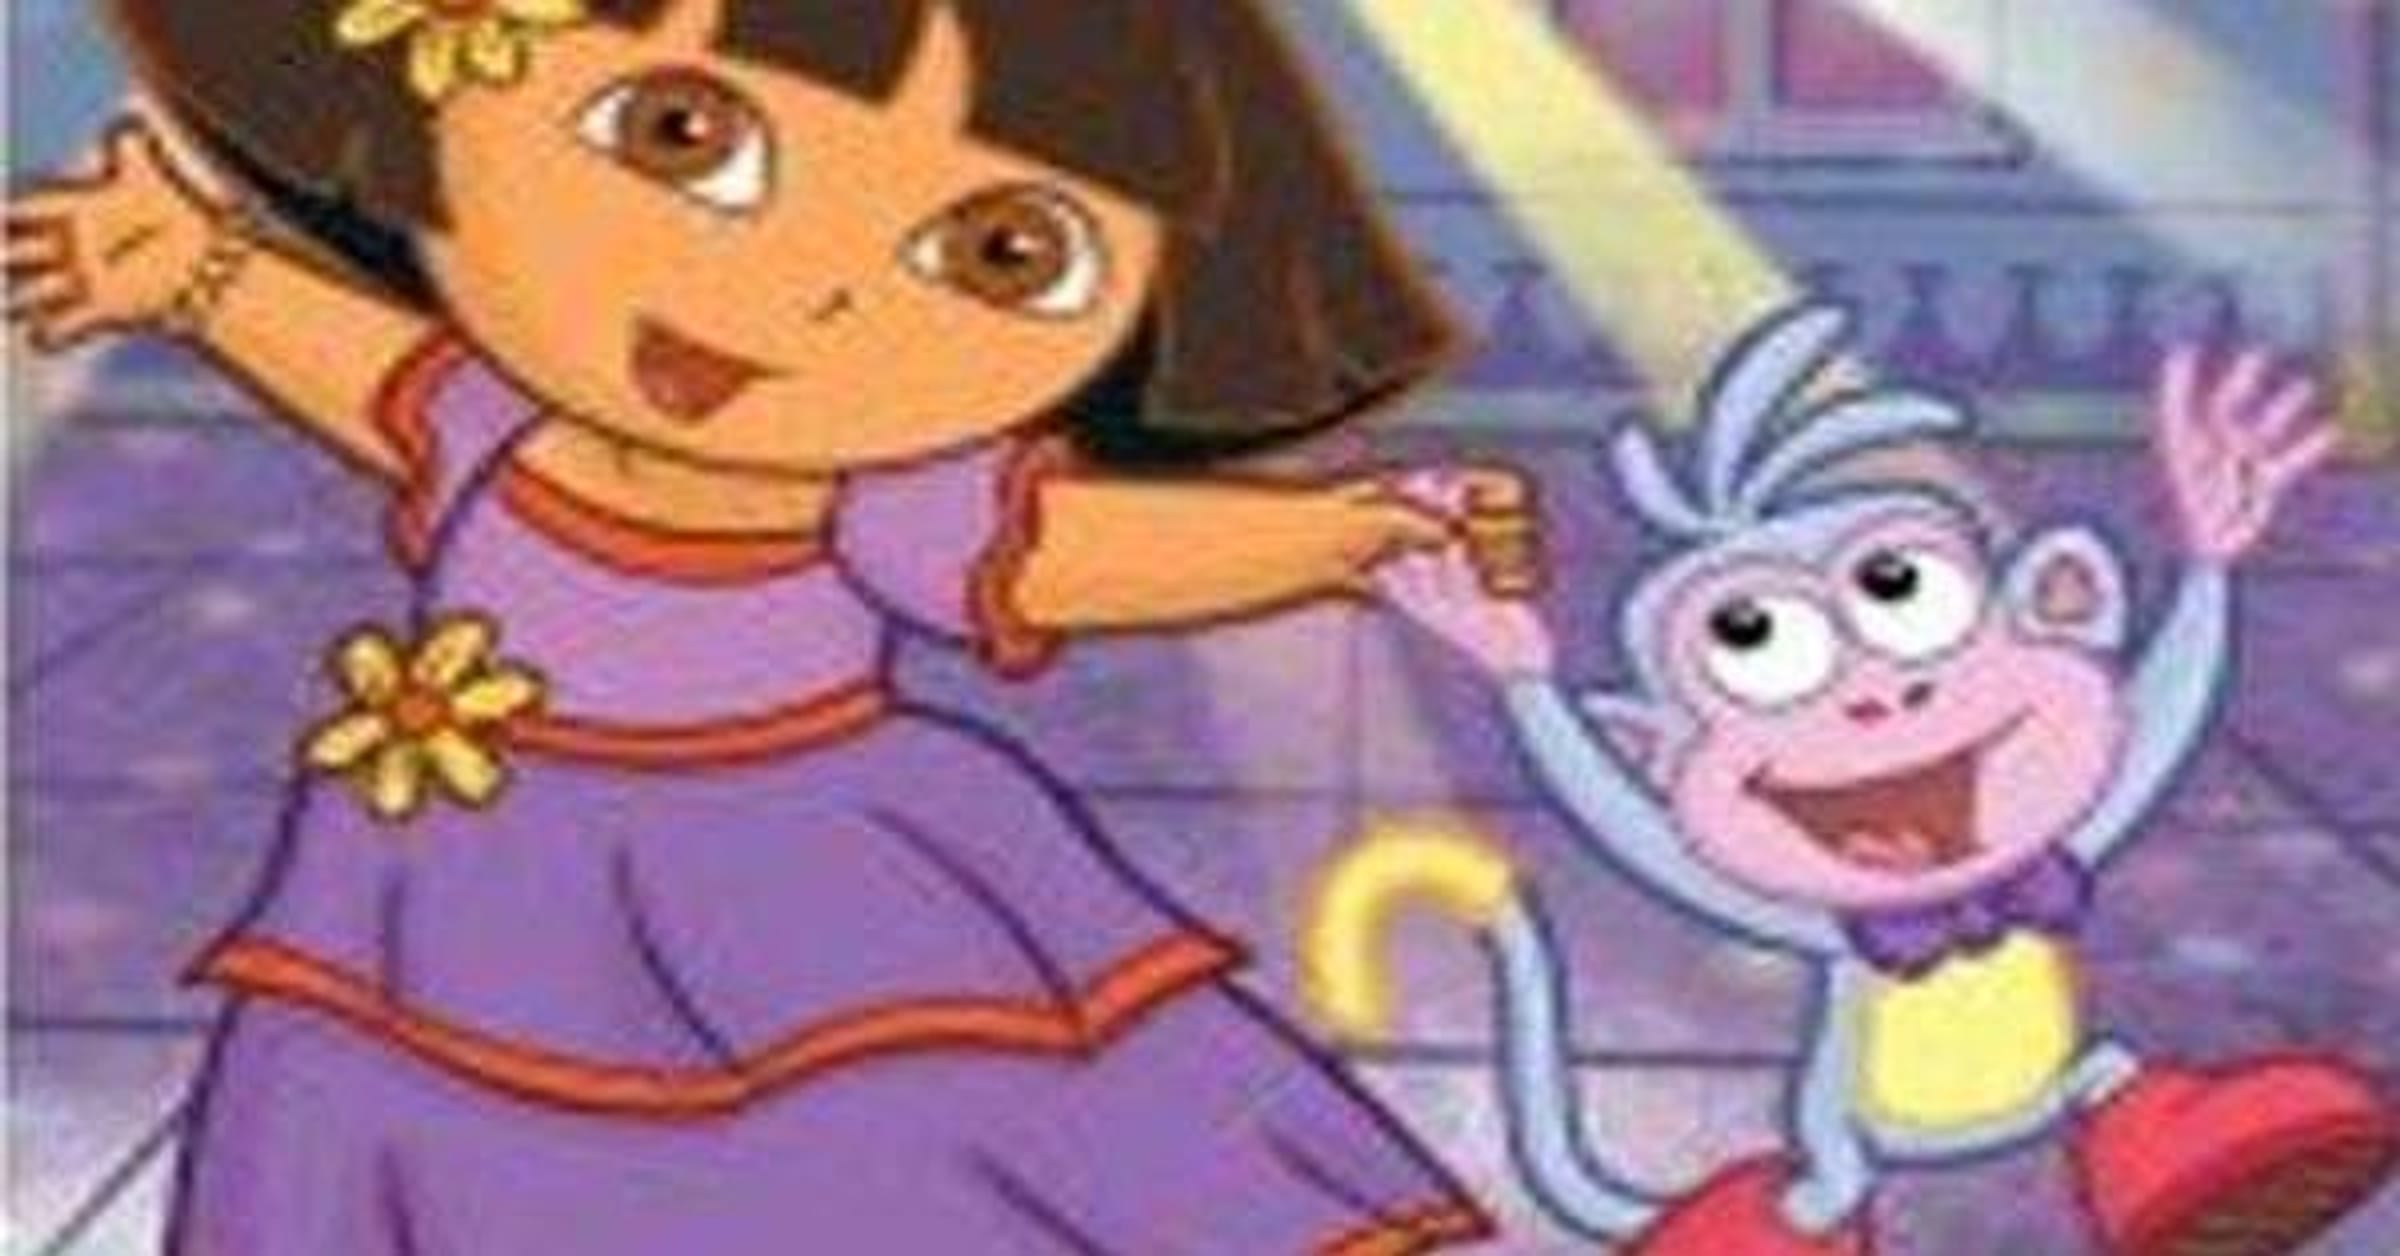 Dora the Explorer: Dora's Playtime with the Twins